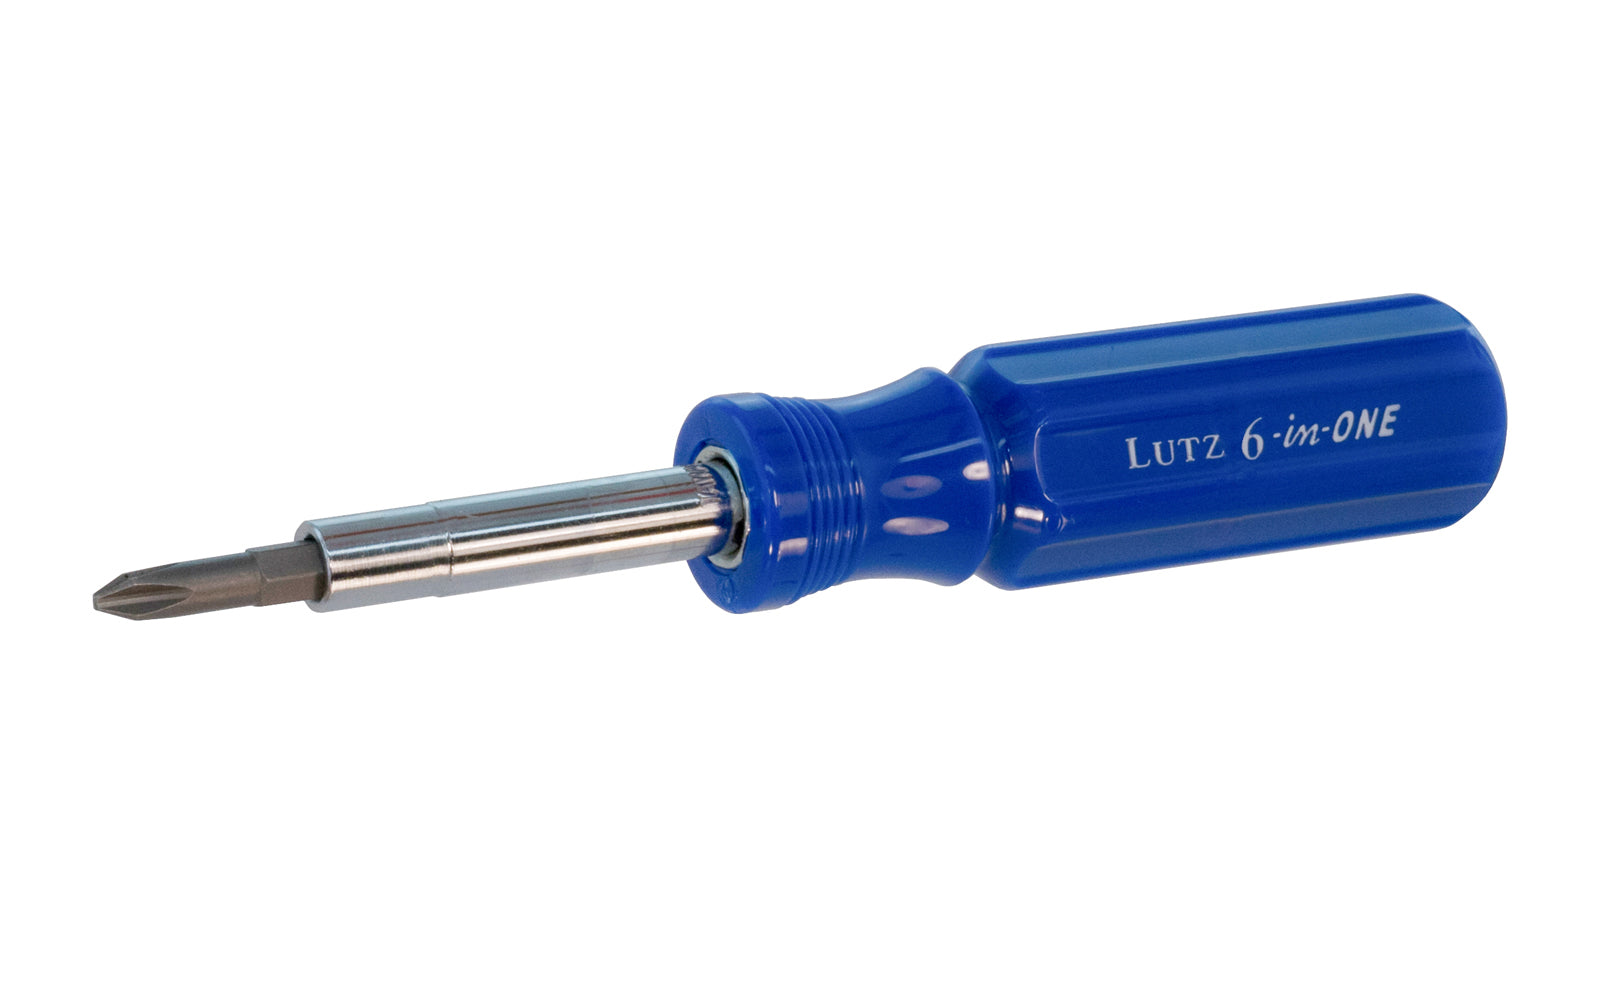 Lutz 6-in-1 Screwdriver in a blue color. Includes 1/4